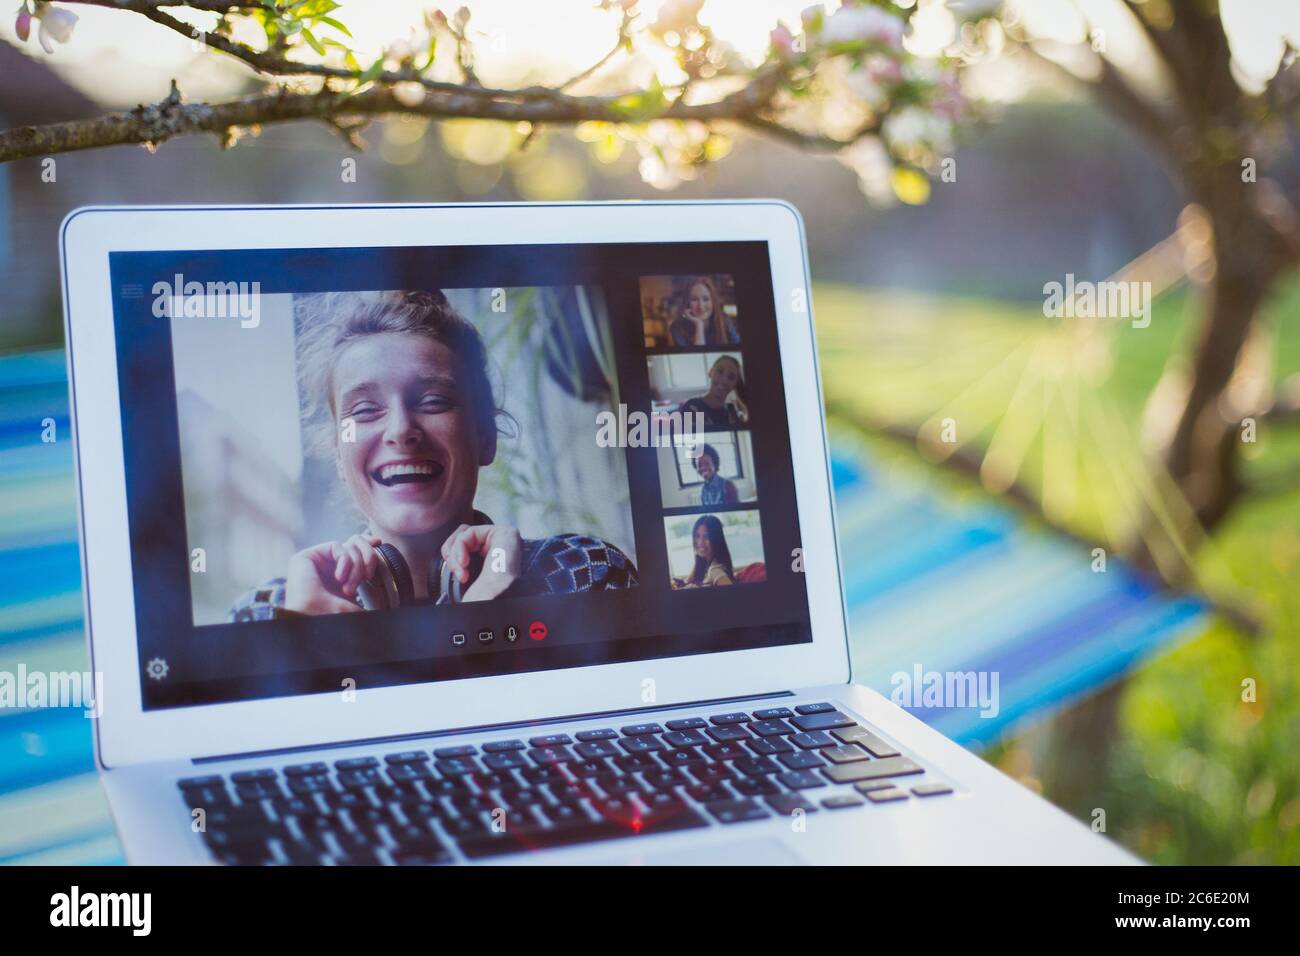 Friends video chatting on laptop screen in sunny garden Stock Photo